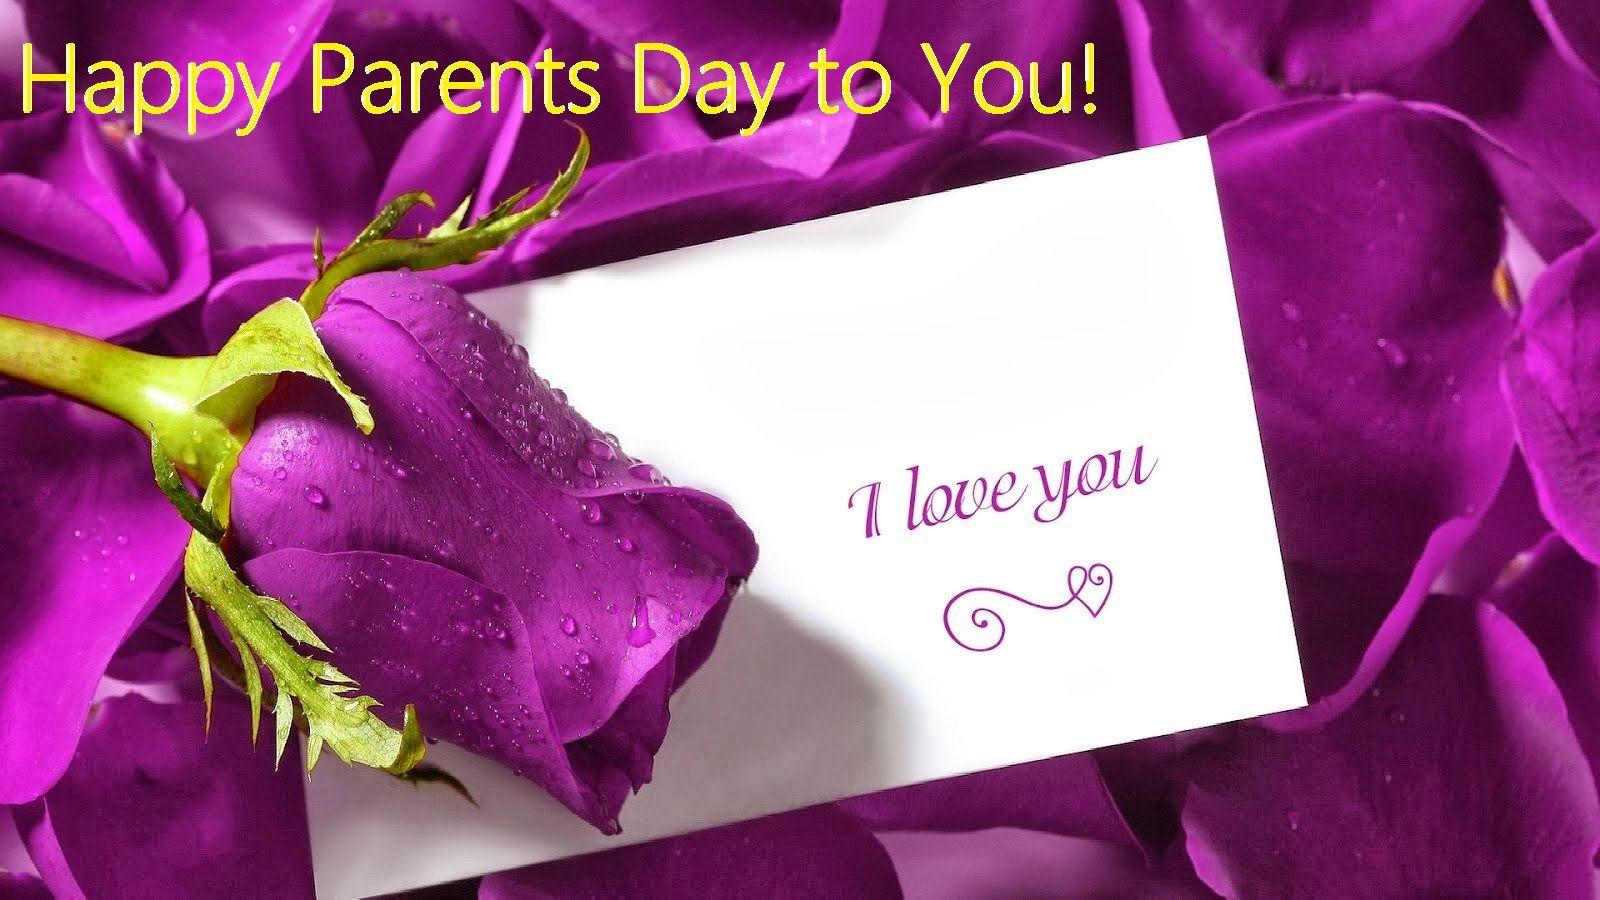 Festivals Of Life: Happy Parents' Day 2016 SMS, Image, Wallpaper